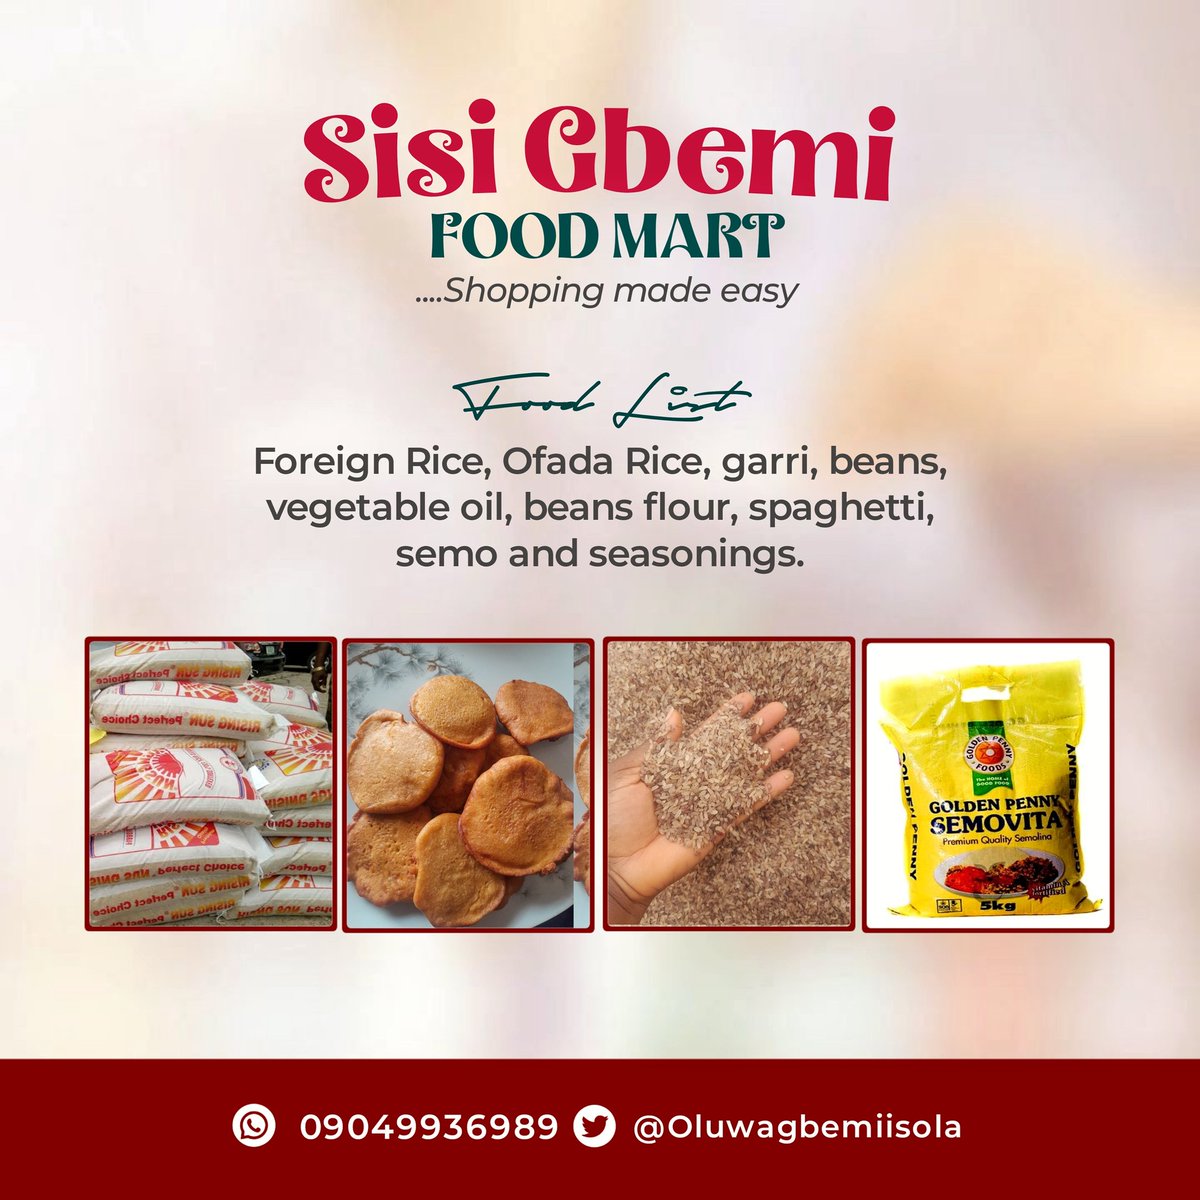 @stayingpositif Good morning and happy Sunday sir. I sell rice and food stuff packages.